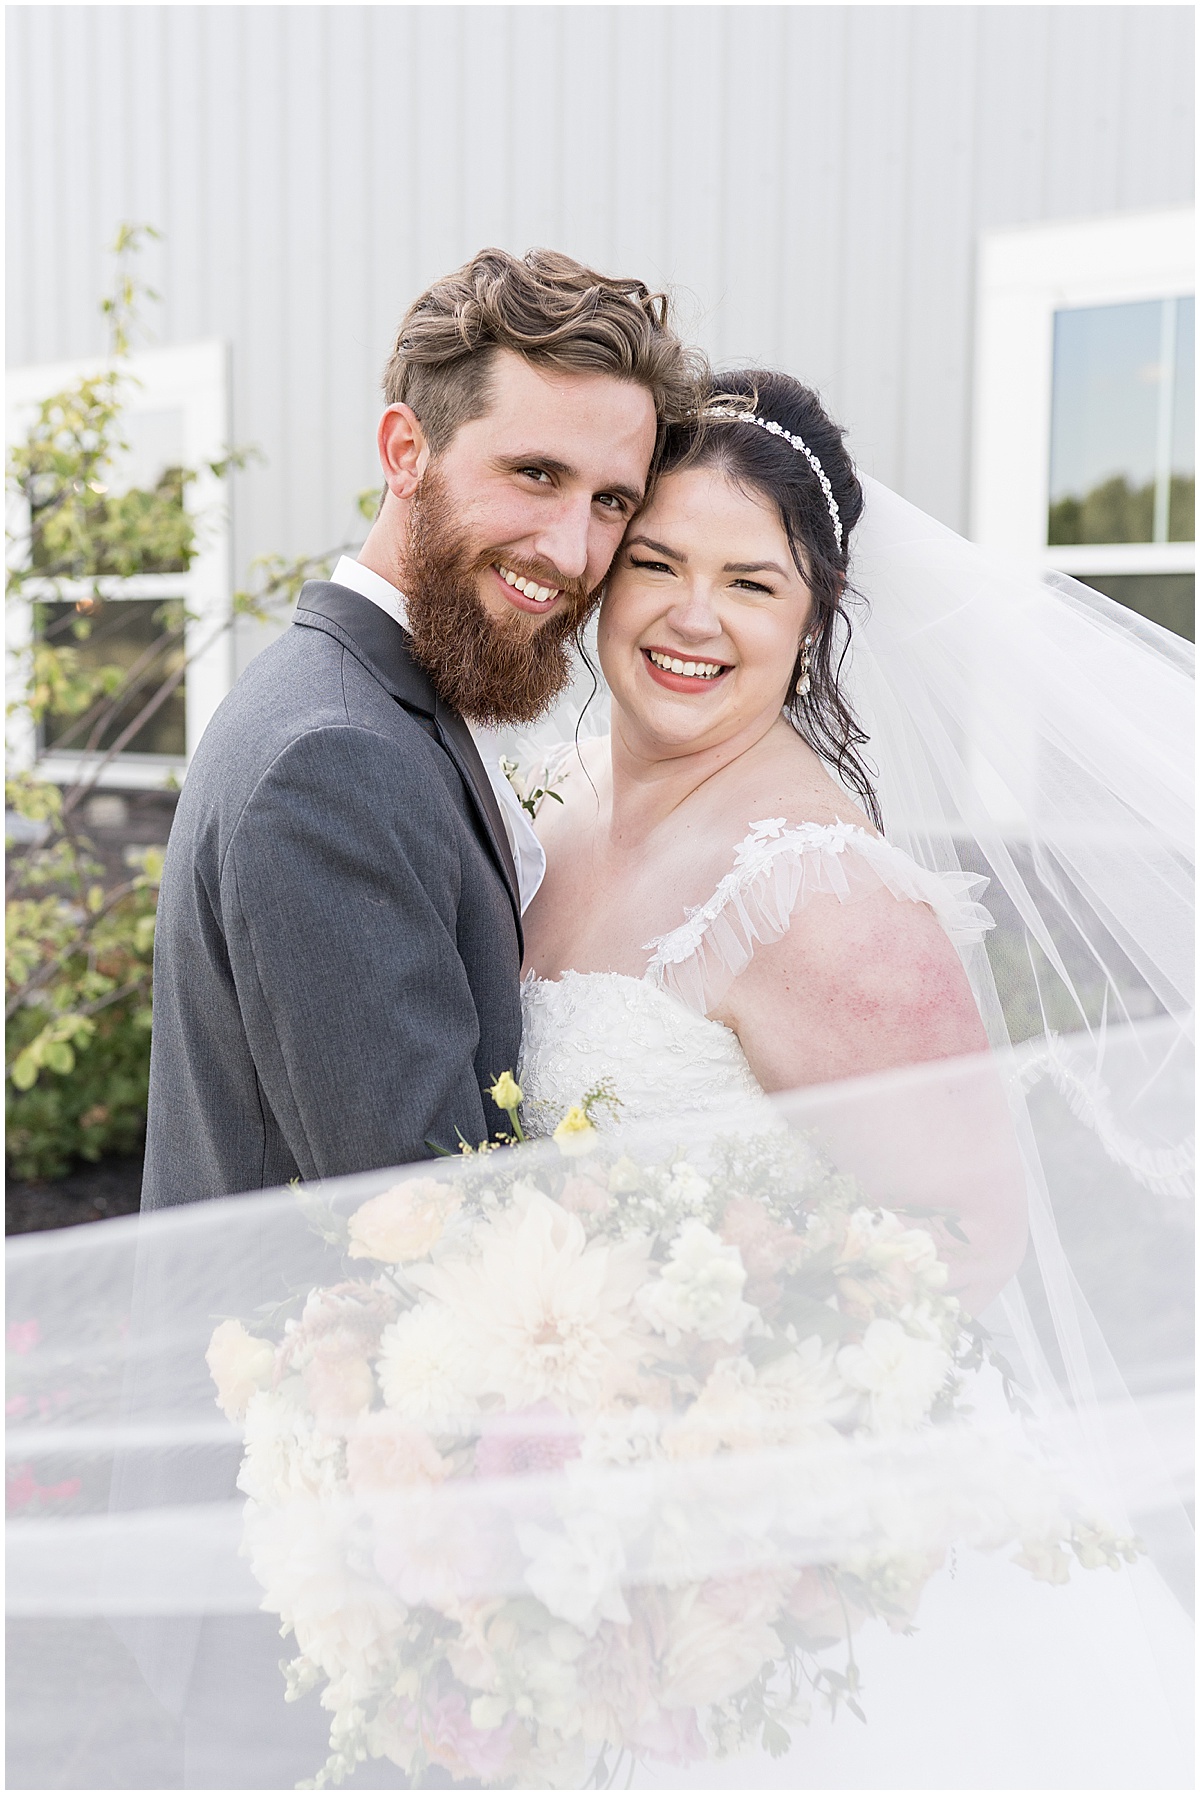 Bride and groom wrapped in veil after pastel wedding at New Journey Farms in Lafayette, Indiana